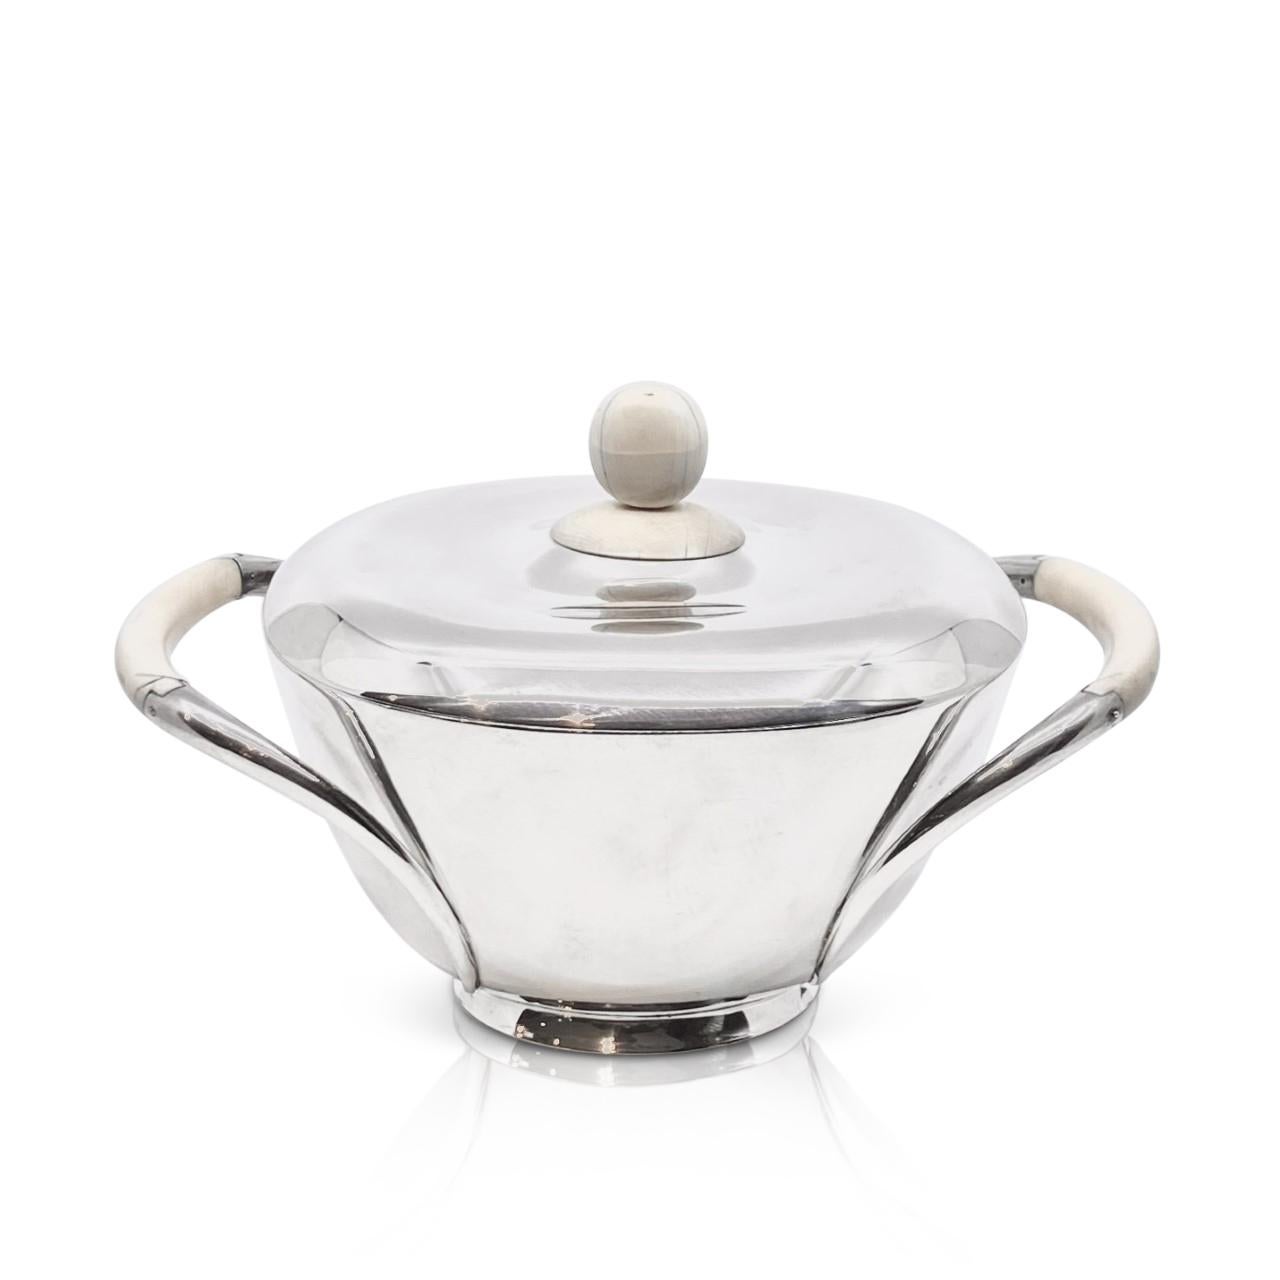 Sterling silver Mid-Century tureen with ivory handles and finial, design Svend Weihrauch from the 1940s. Elegant Mid-Century design, F. Hingelberg was one of the premier silvers makers in Denmark at the time, their hand craftsmanship is of the